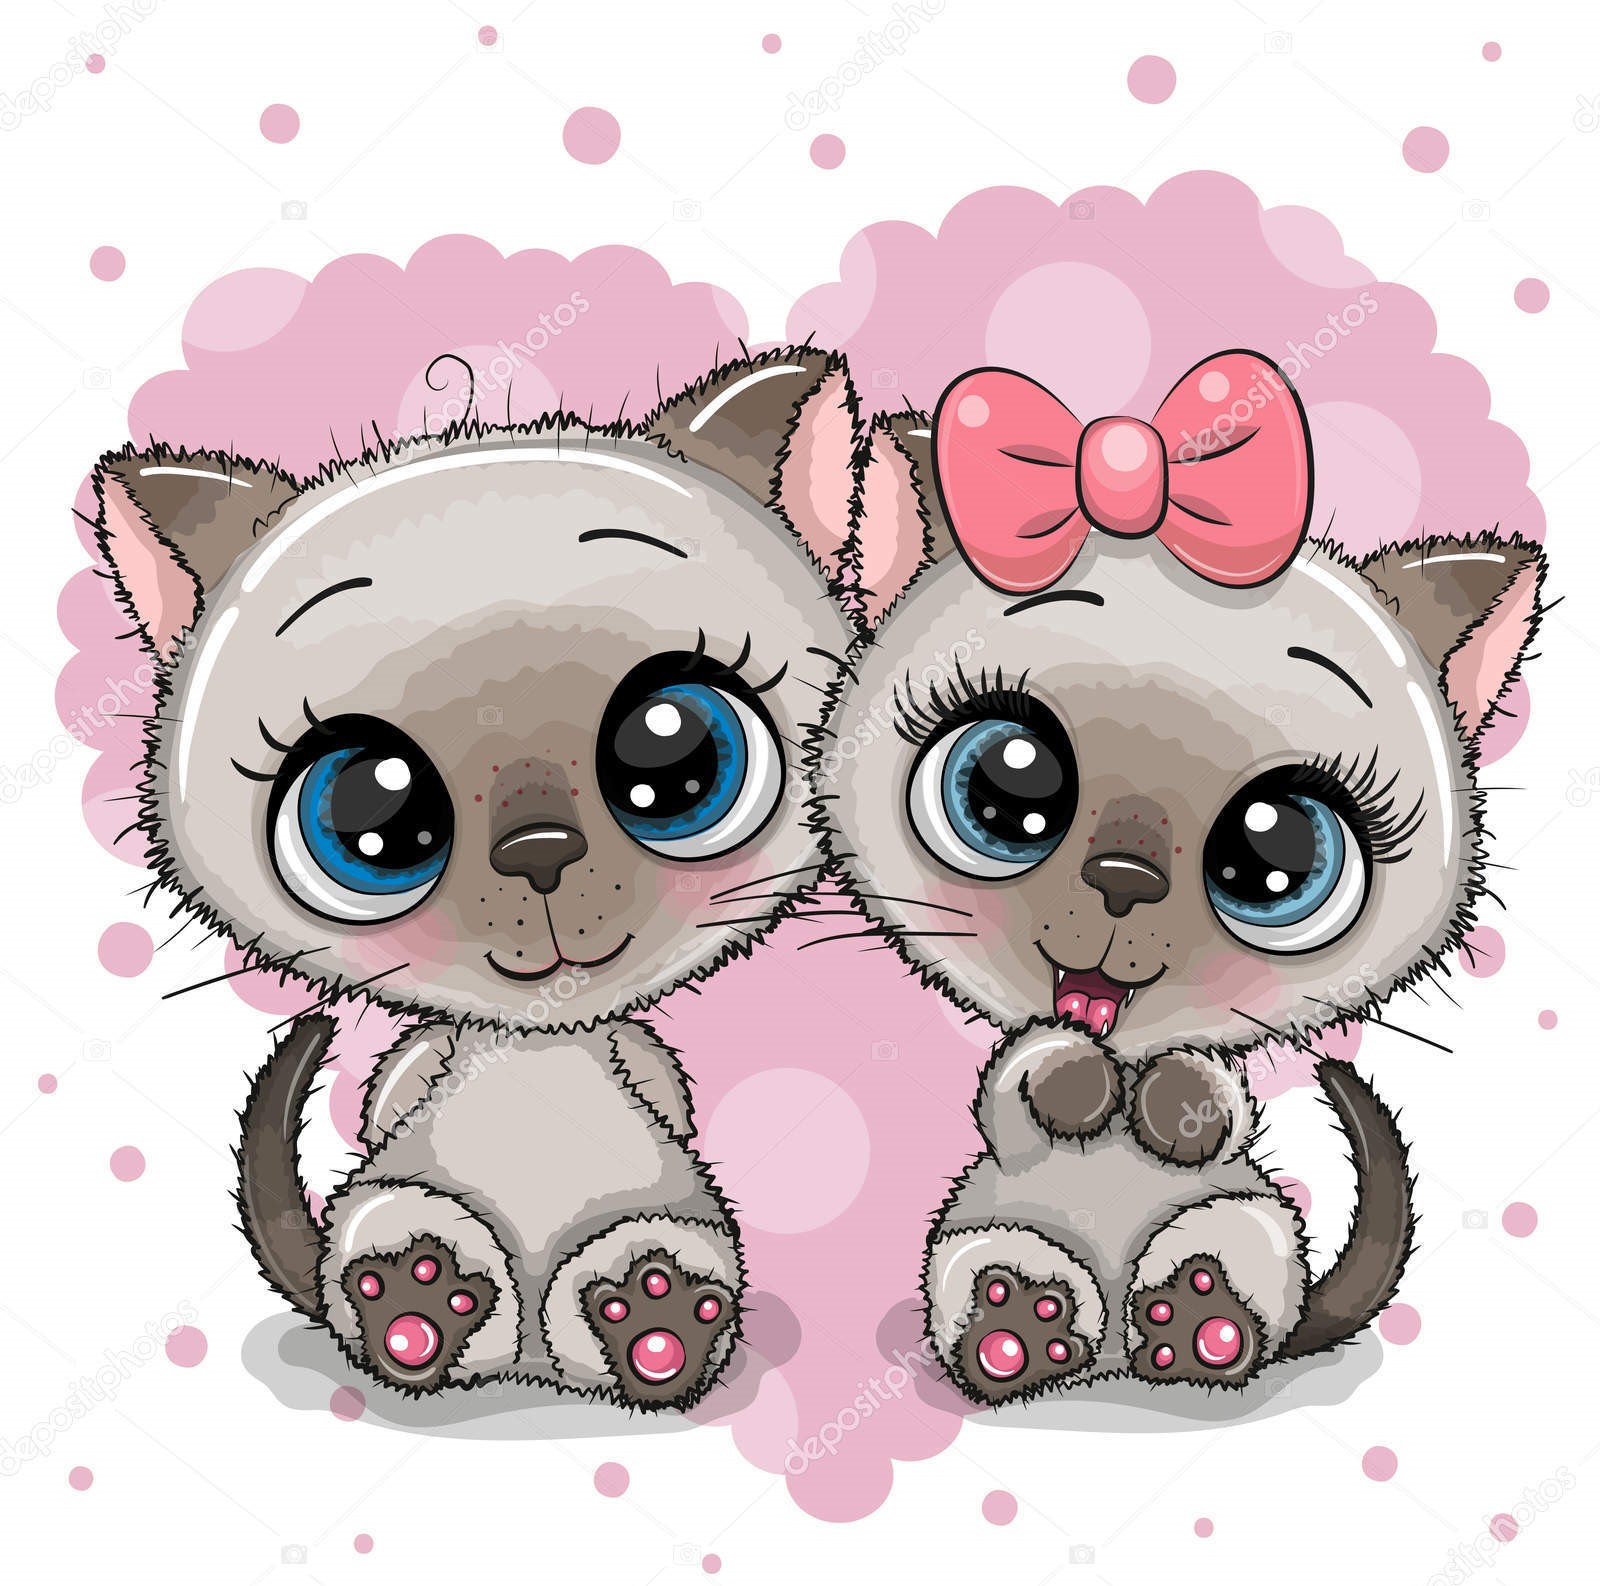 depositphotos 247750100 stock illustration two cute kittens on a